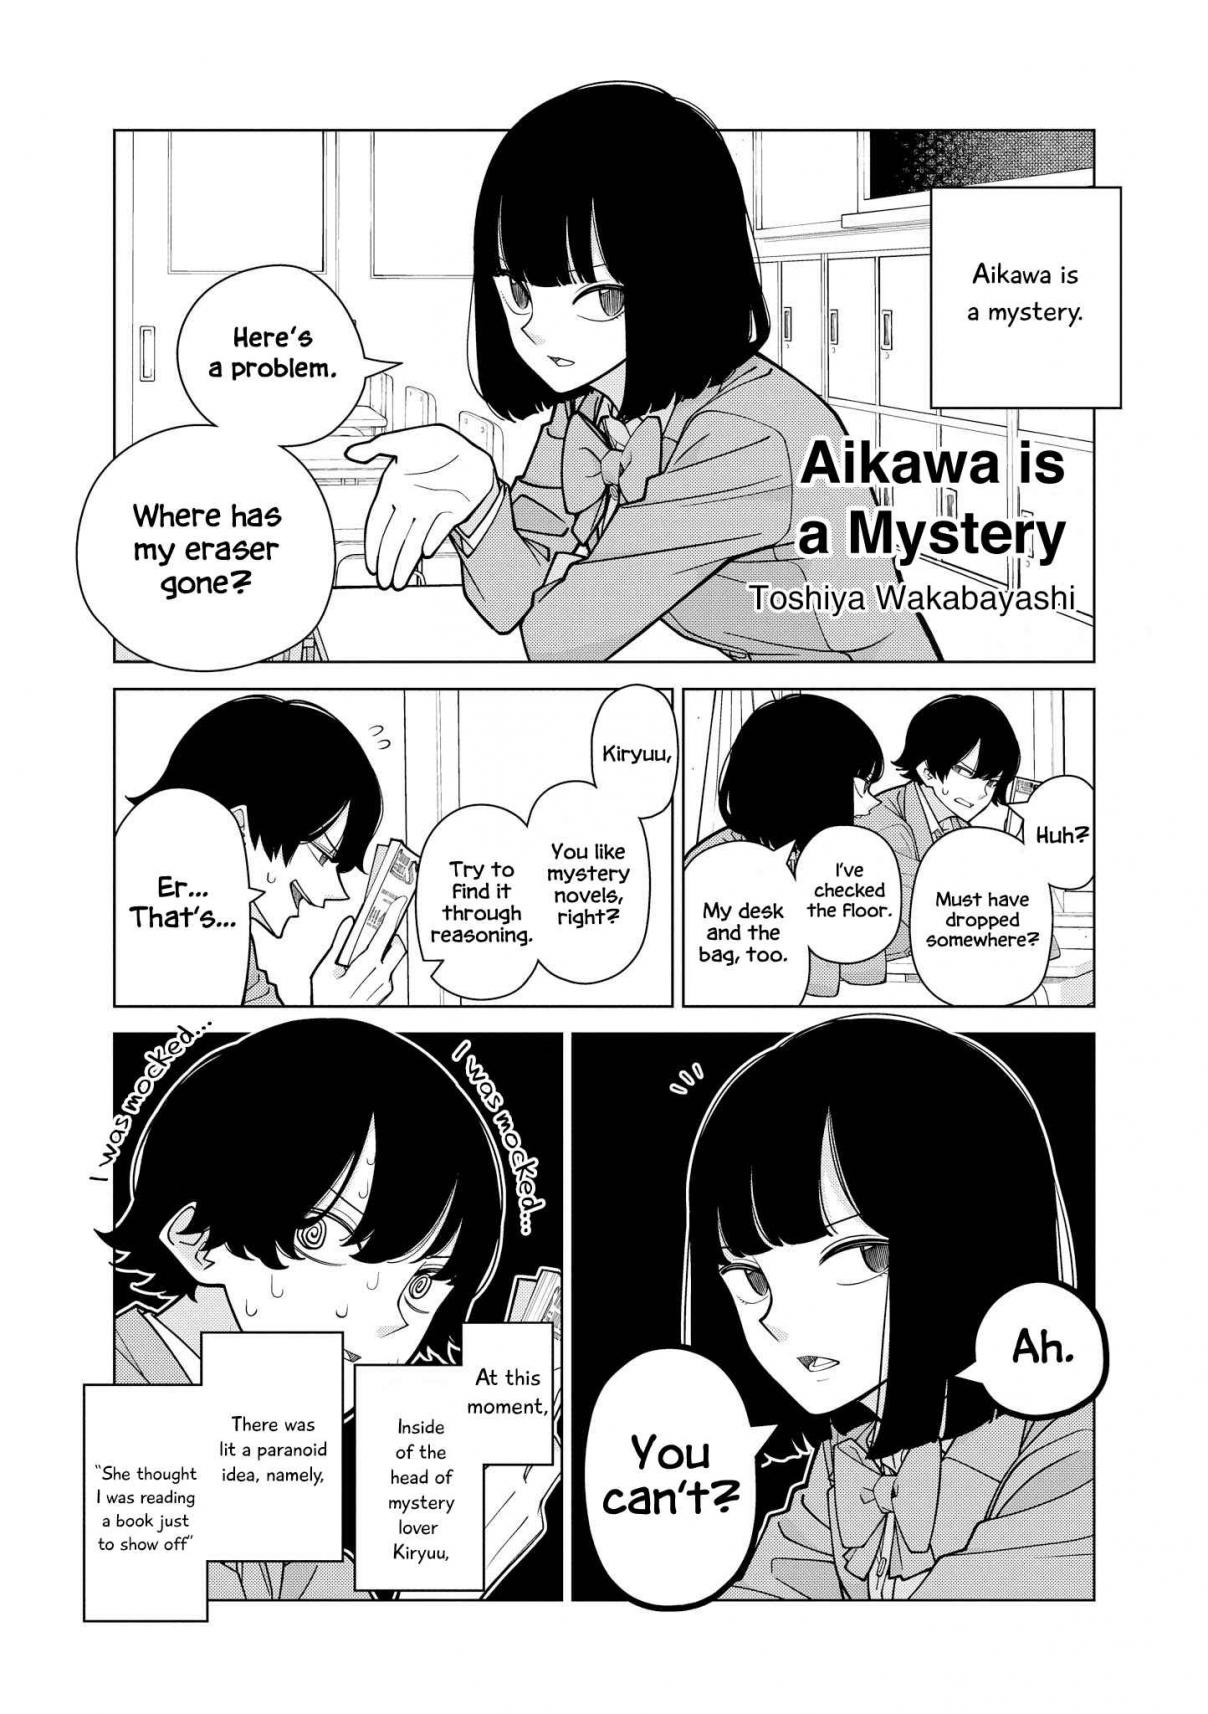 “It’s Too Precious and Hard to Read!!” 4P Short Stories Vol. 1 Ch. 8 Aikawa is a mystery [by Toshiya Wakabayashi]